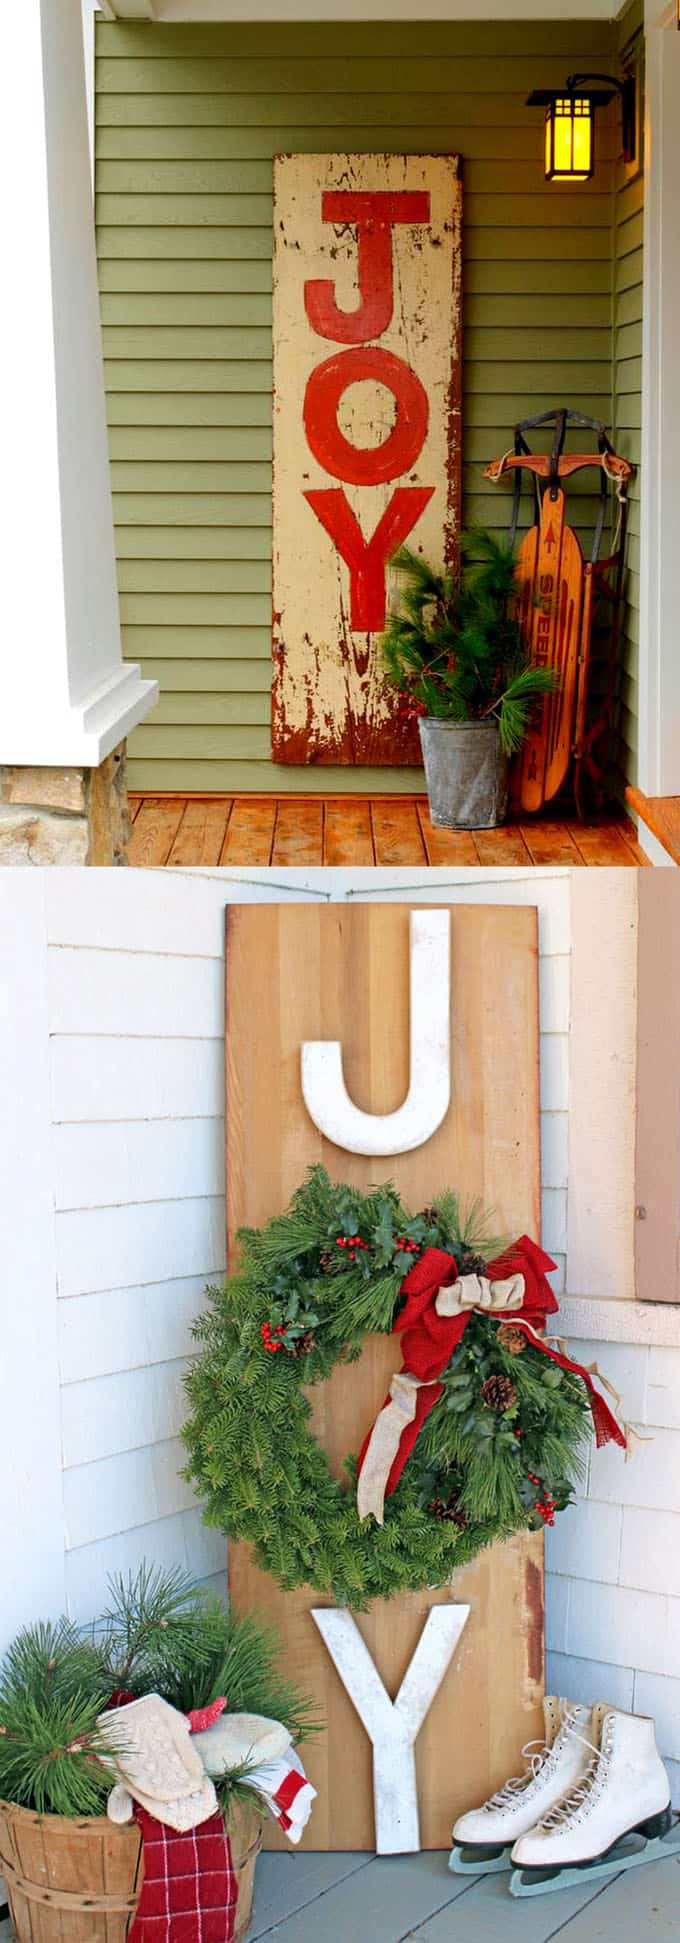 Easy Outdoor Christmas Decorations
 Gorgeous Outdoor Christmas Decorations 32 Best Ideas